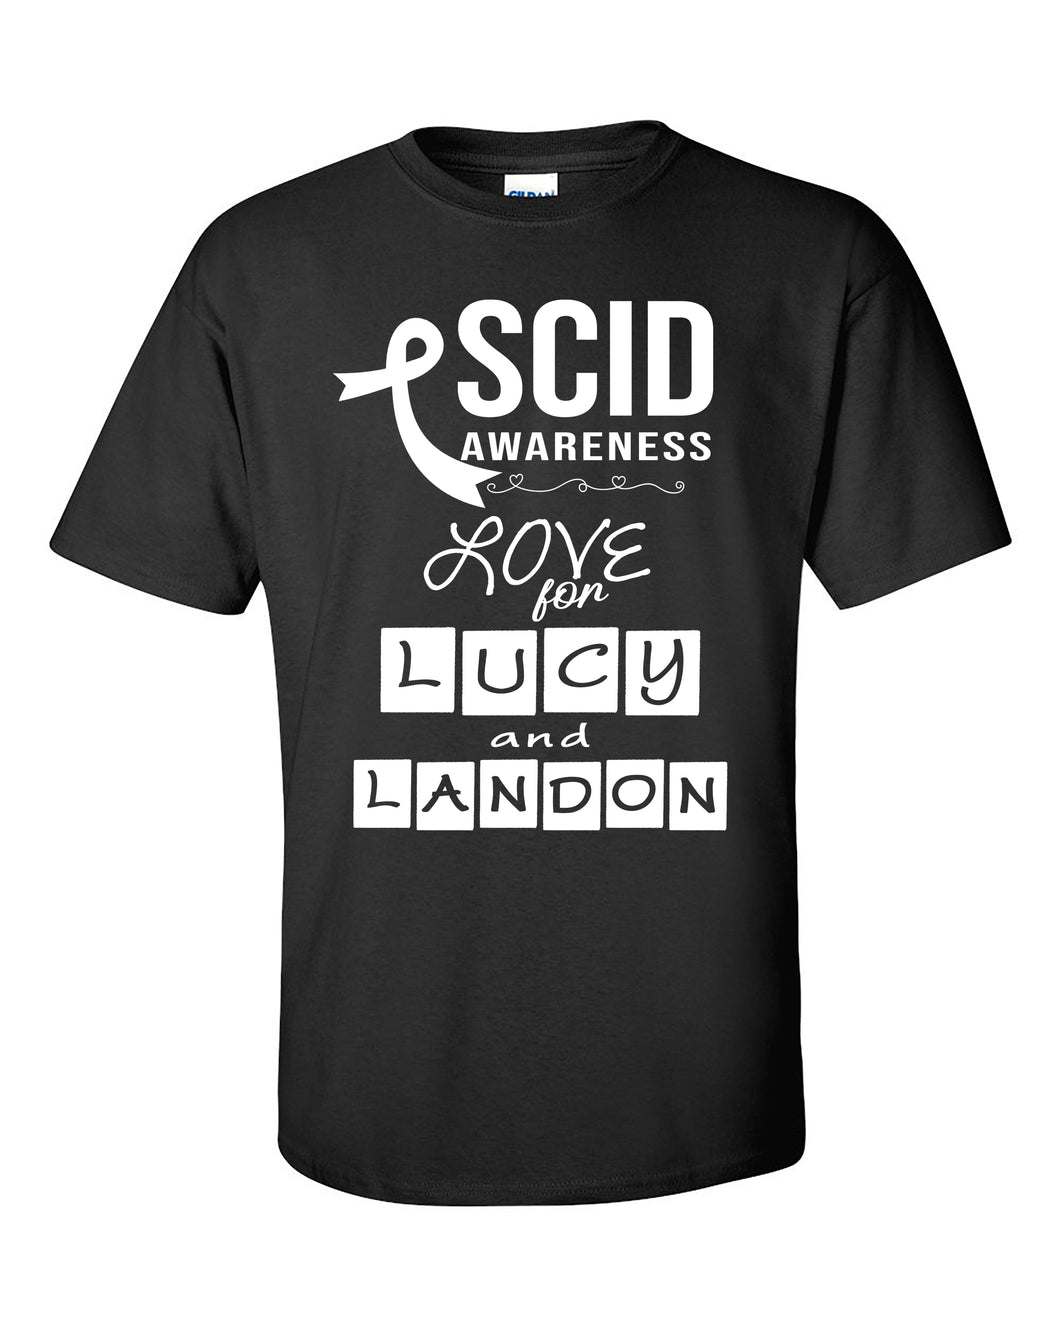 Love for Lucy & Landon Short Sleeve